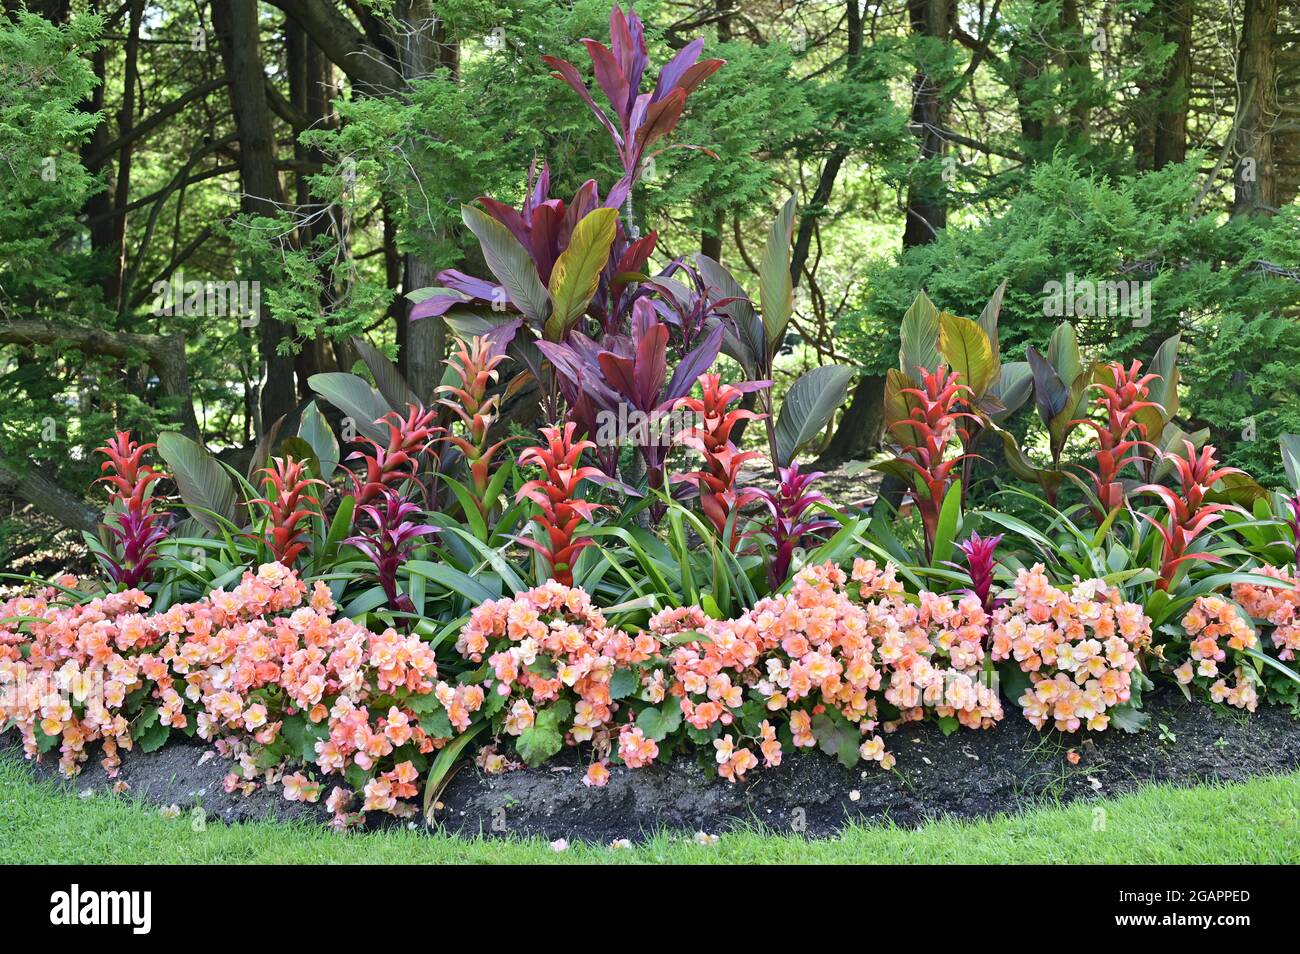 Multi flower in the garden. Lush landscaped garden with flowerbed and colorful plants Stock Photo